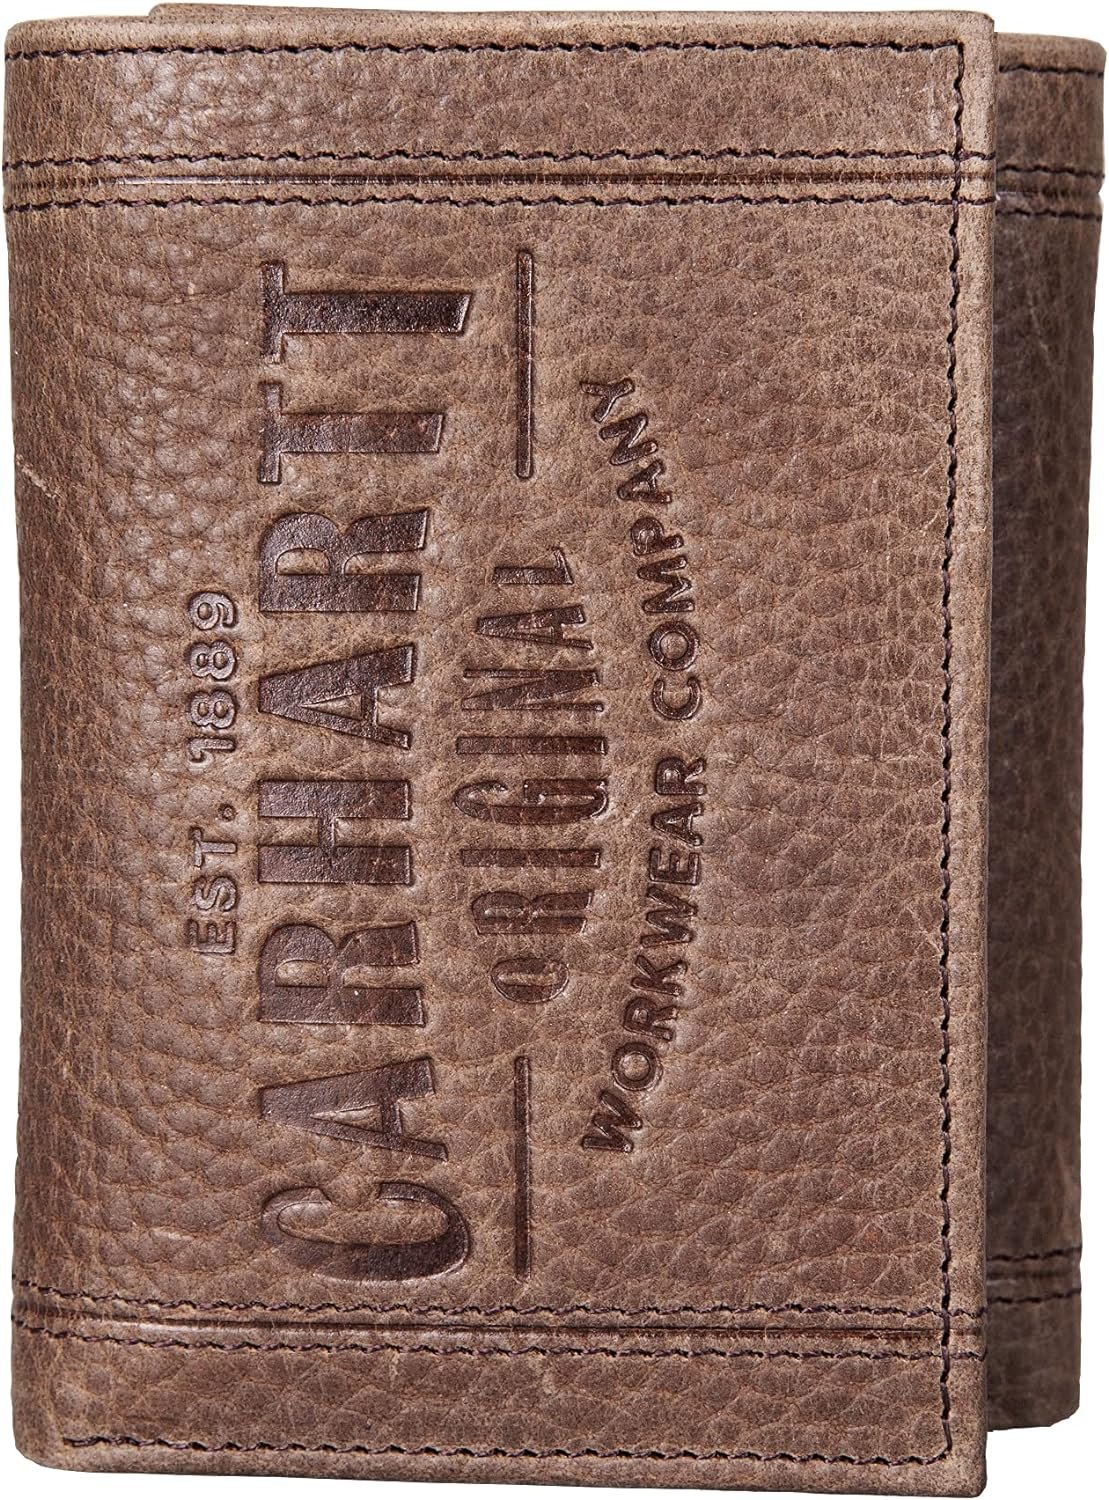 Carhartt Trifold Wallet Review